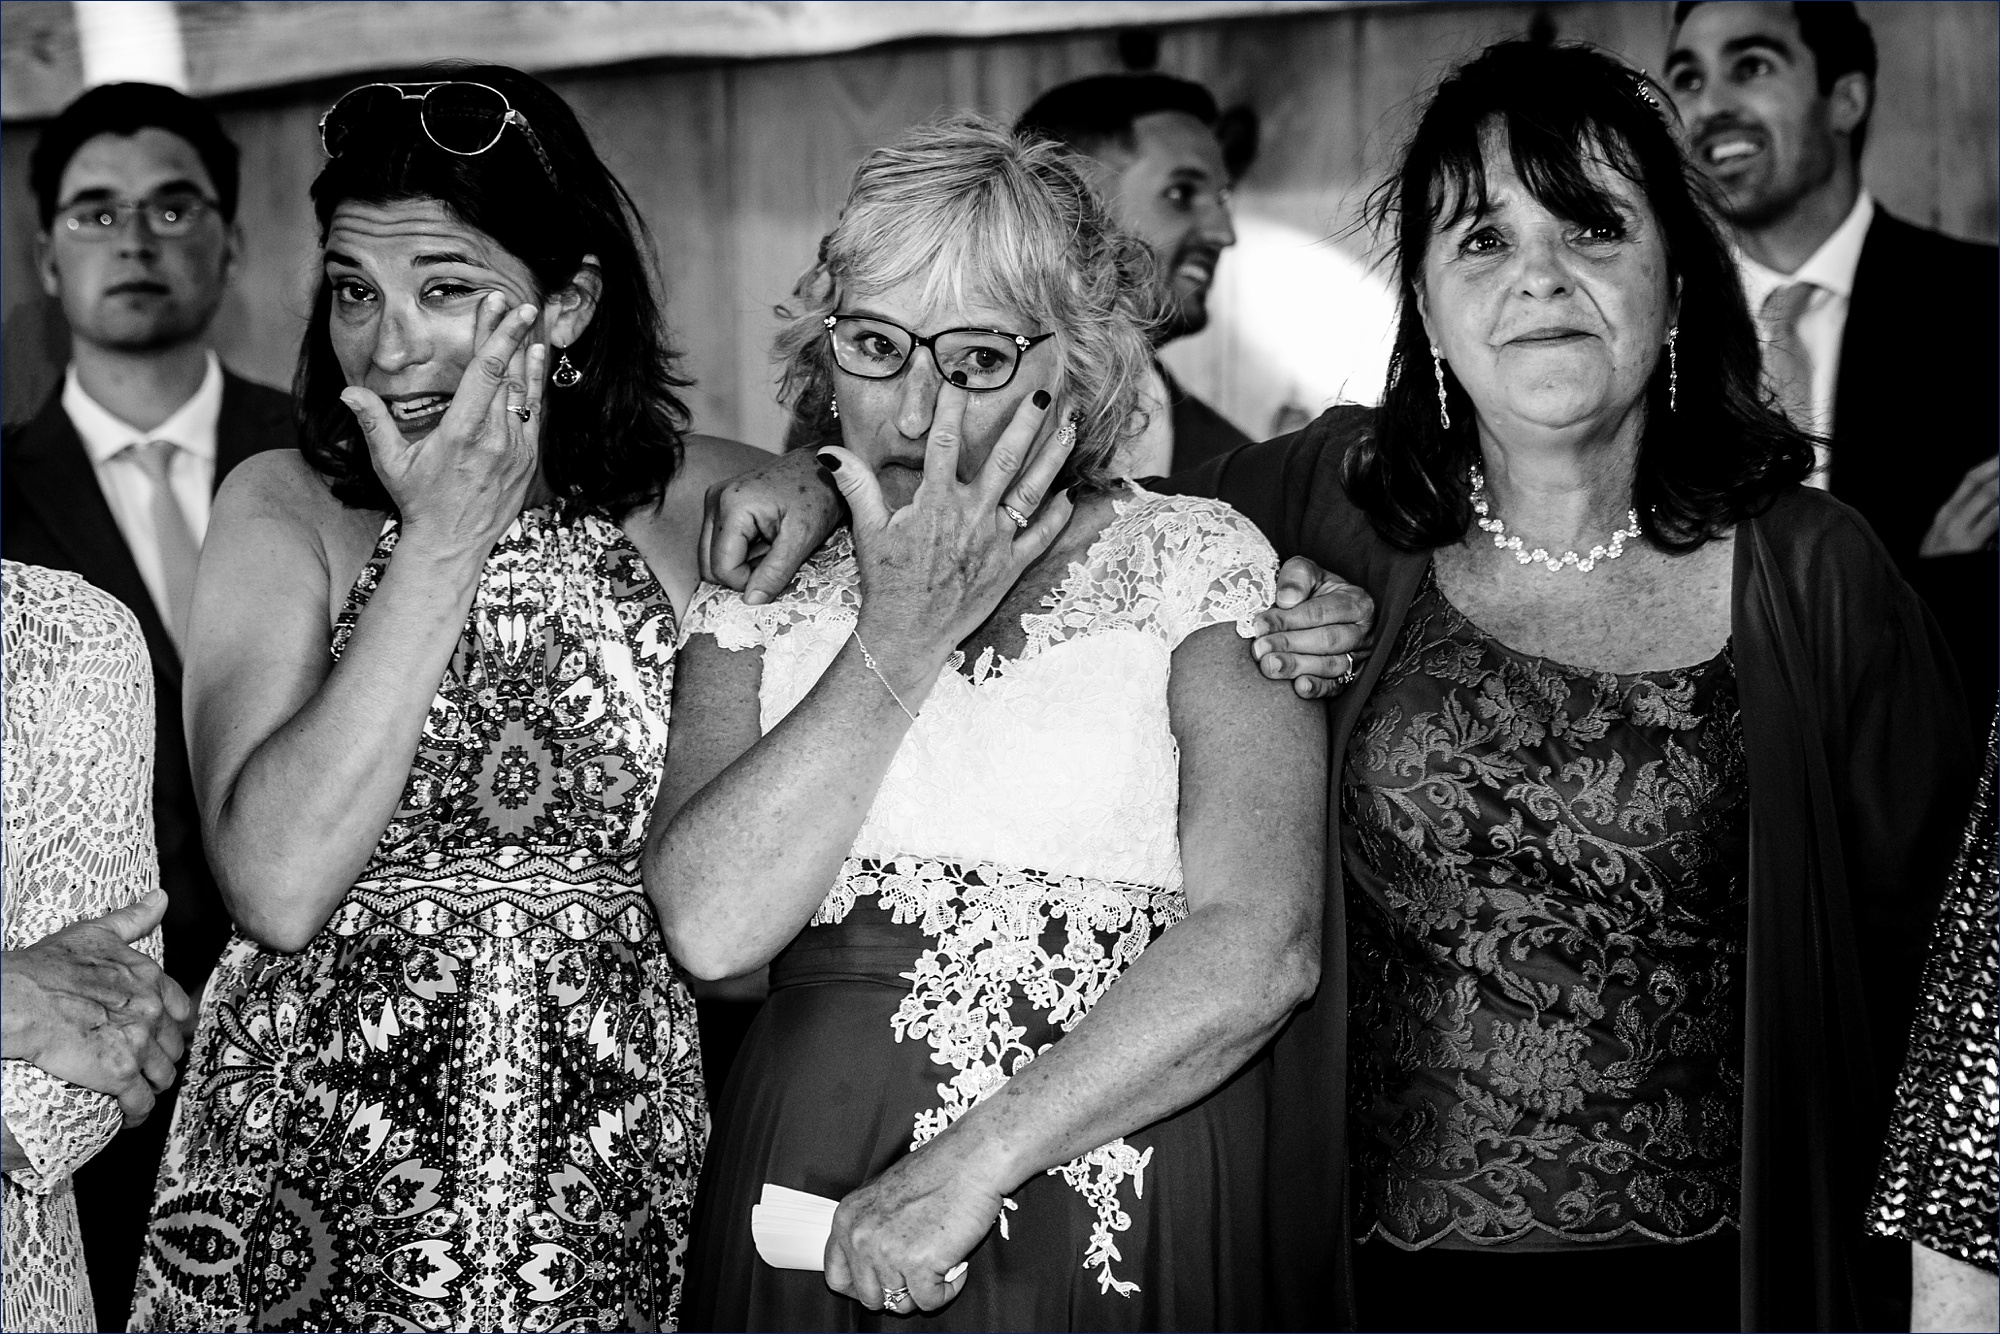 The women close to the bride all tear up as they watch her dance with her father at Kitz Farm